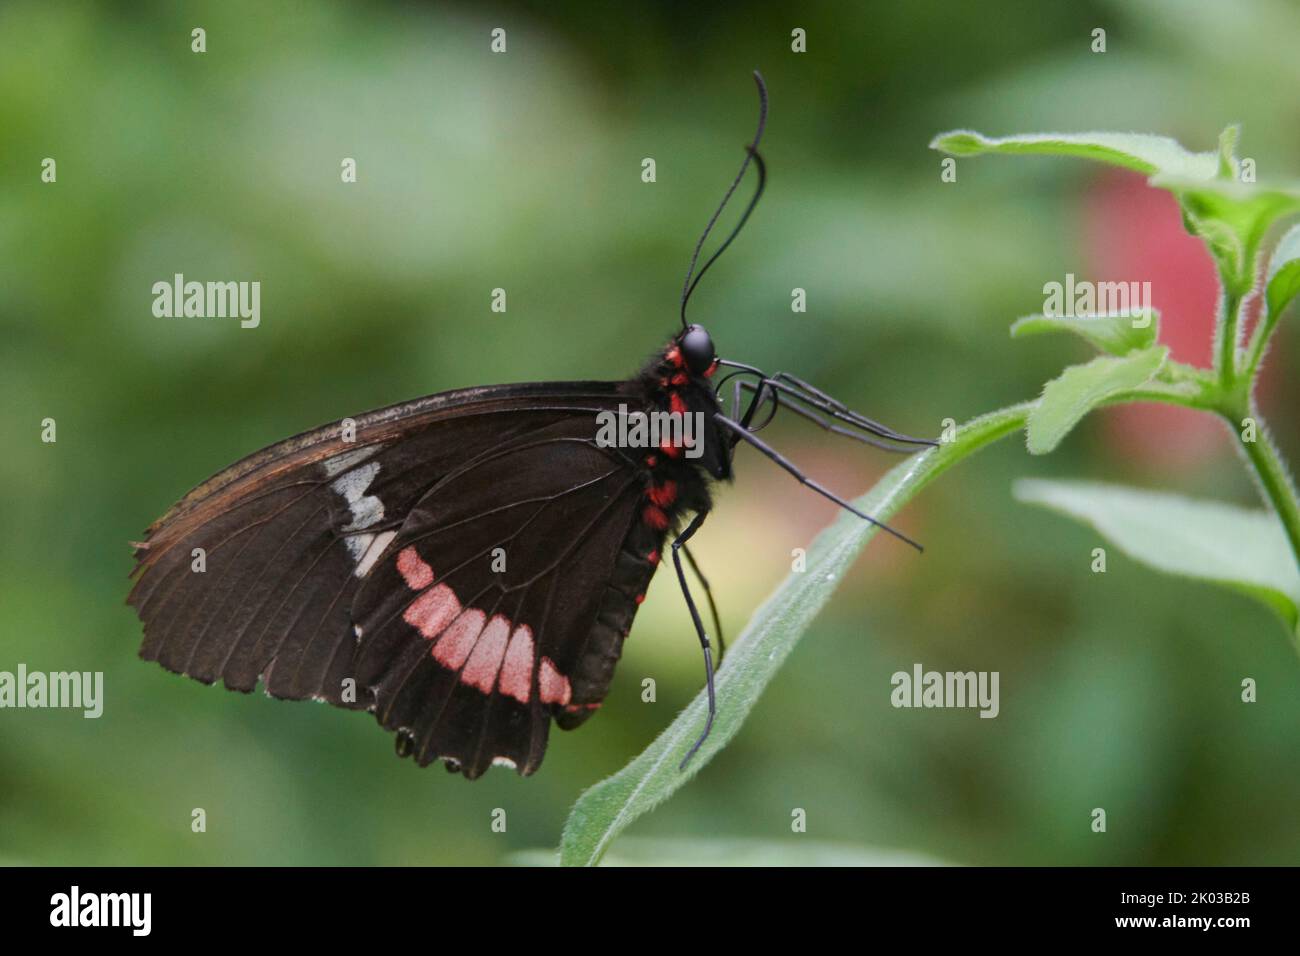 Butterfly on a plant Stock Photo